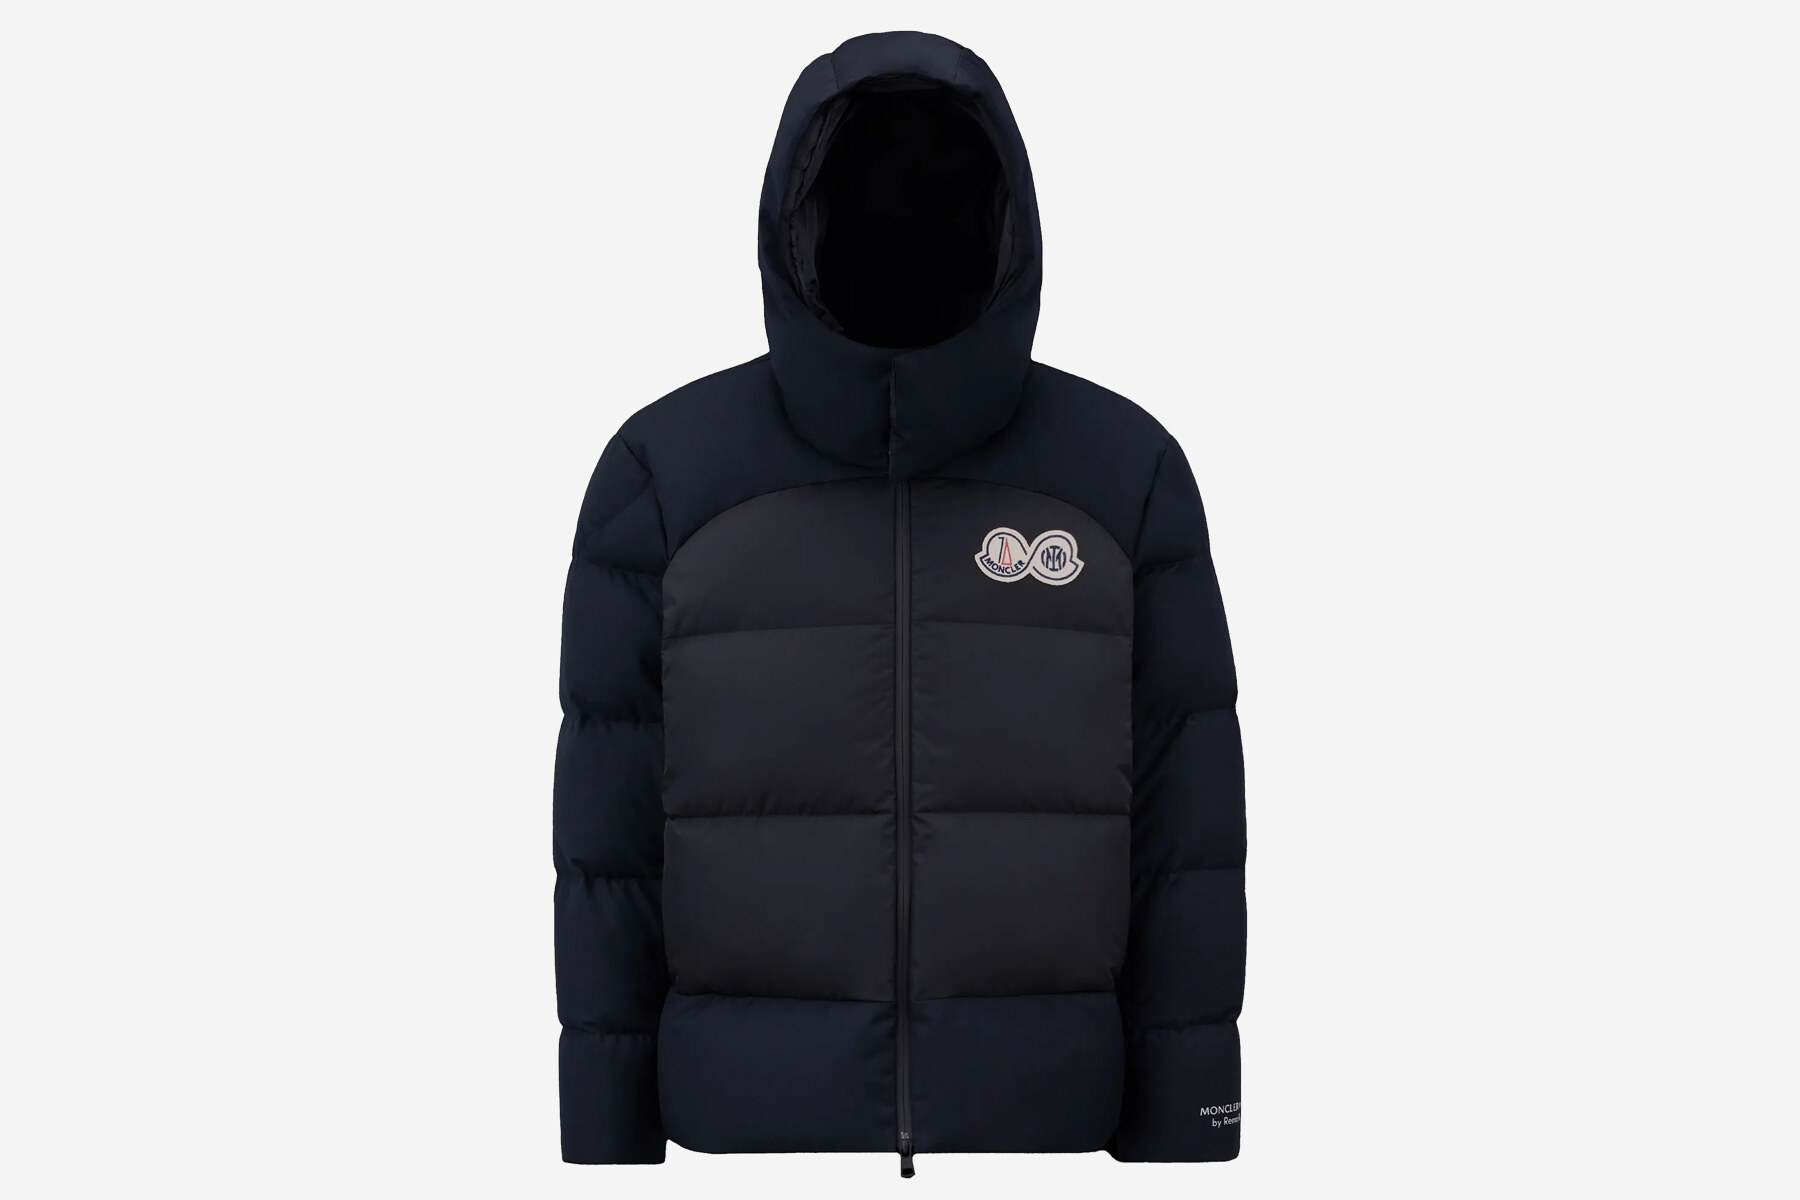 Moncler Inter giacca by Remo Ruffini